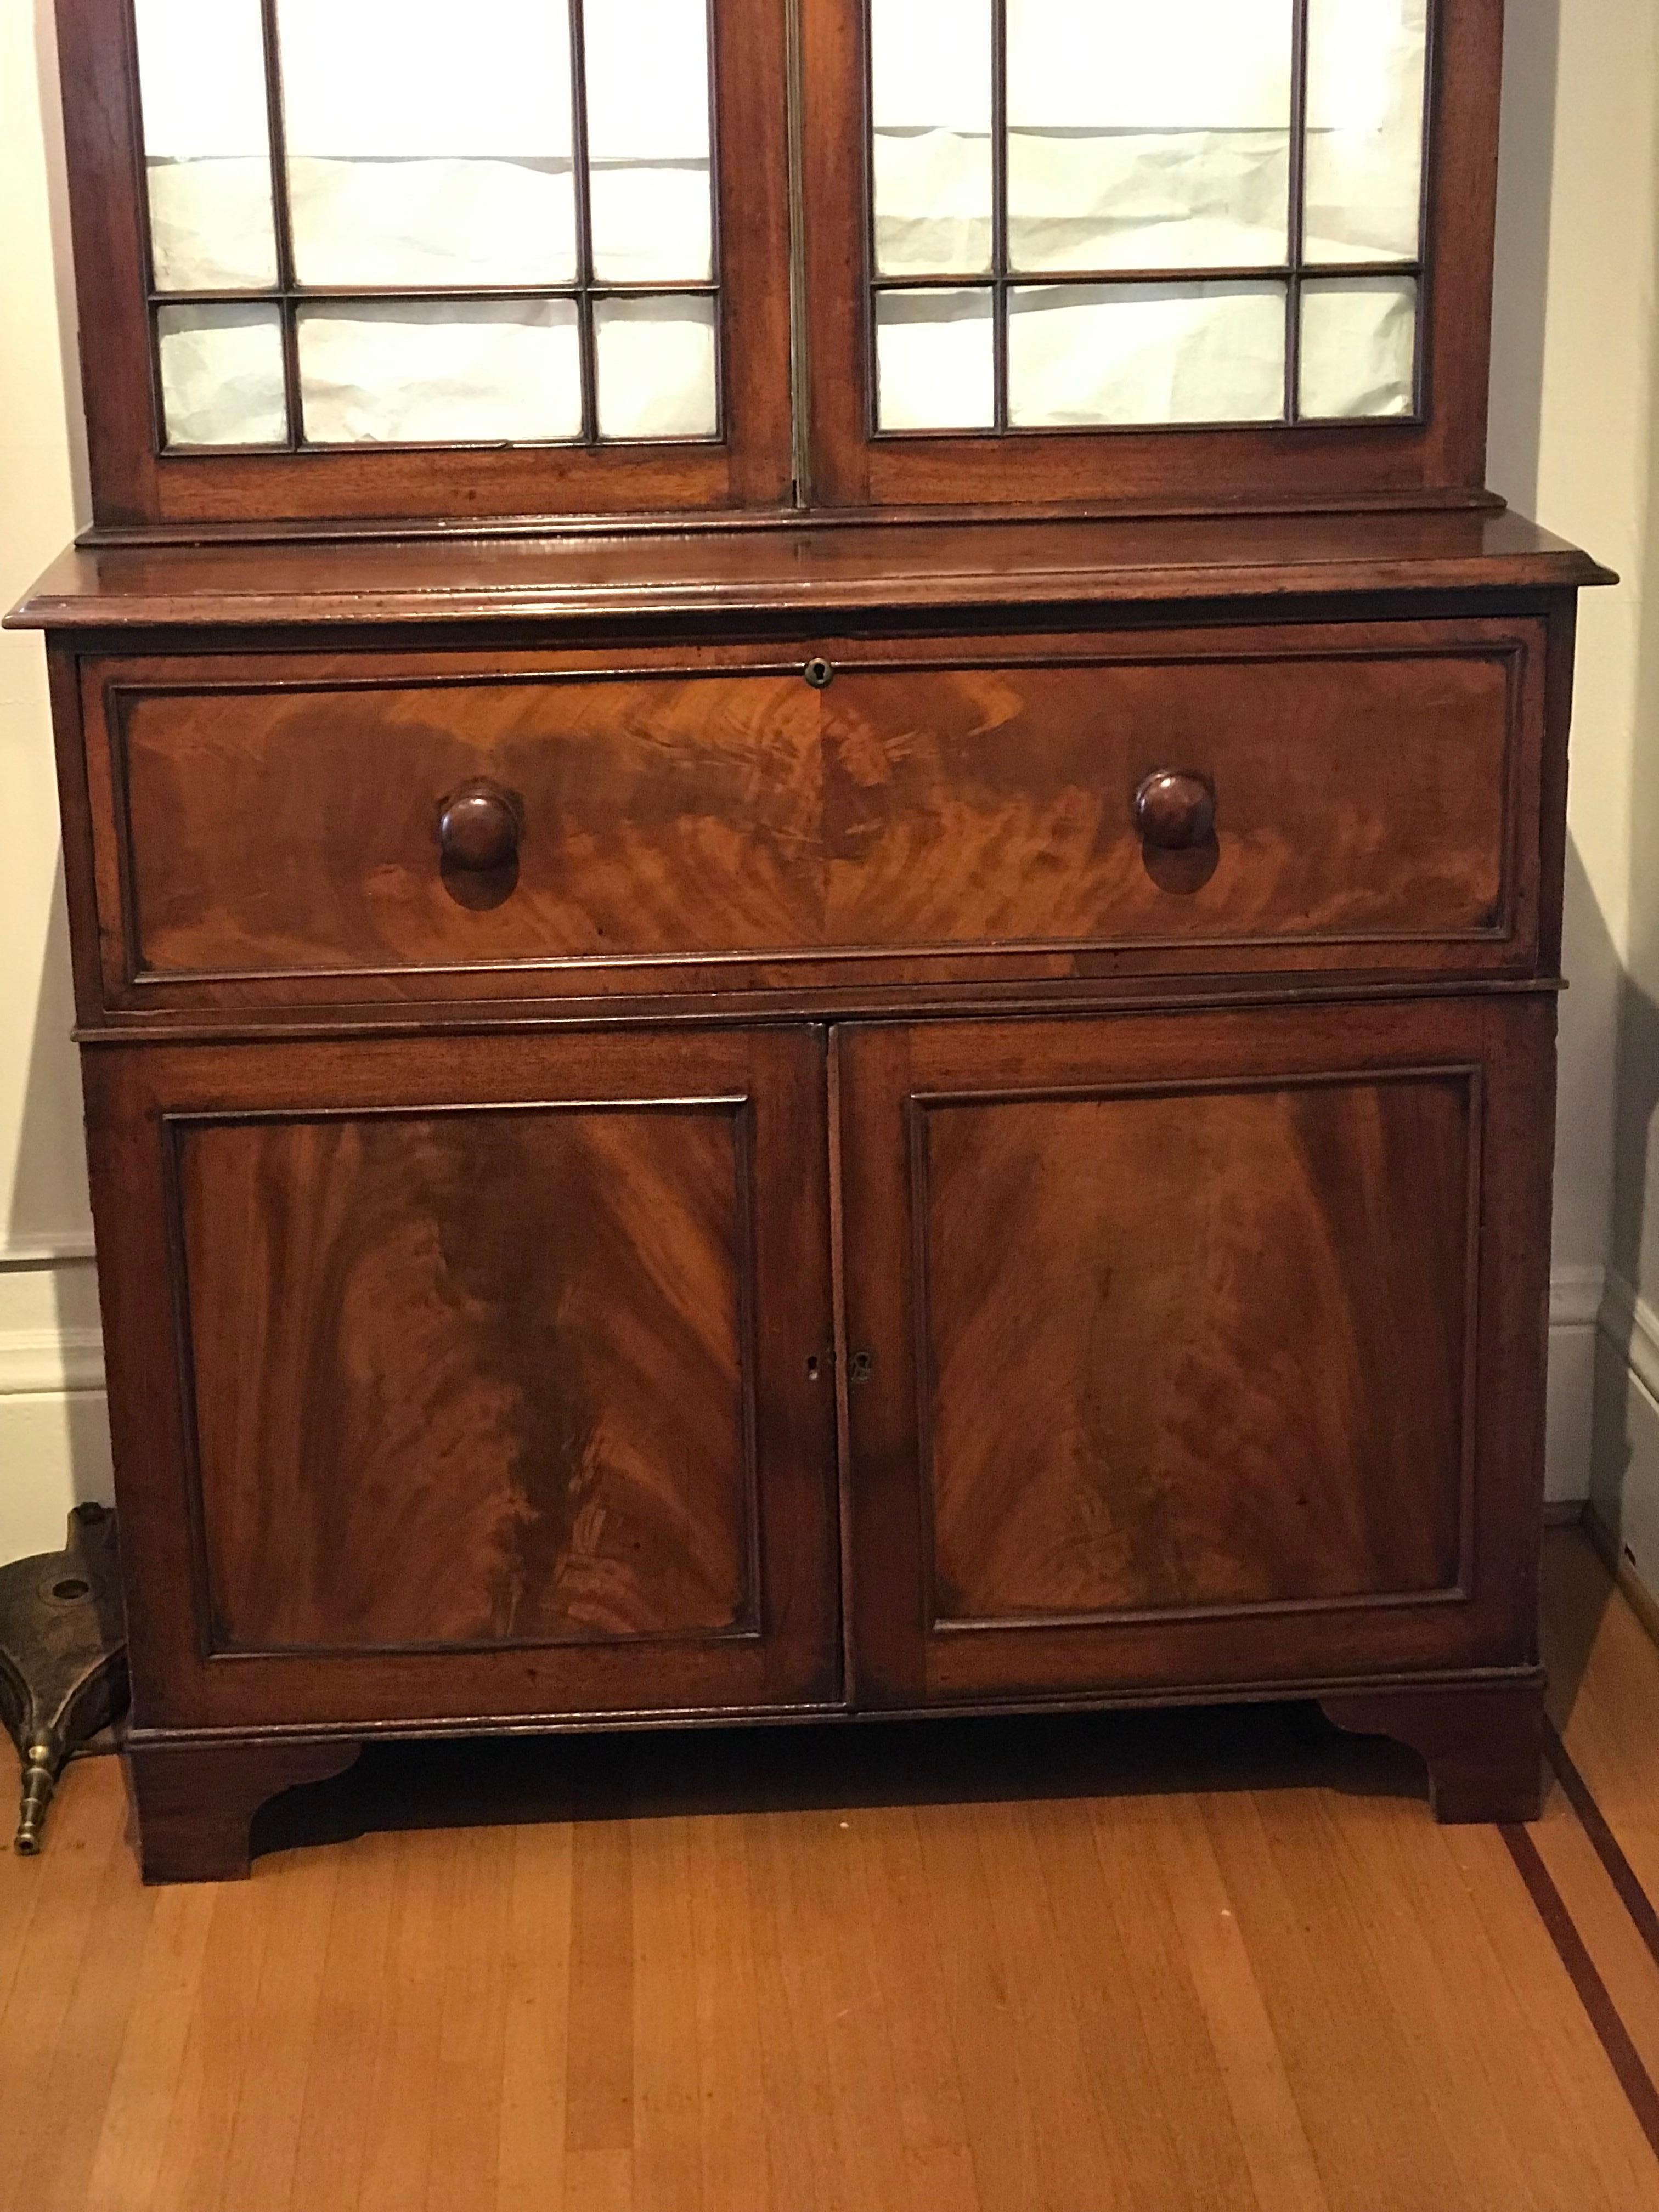 Secretary bookcase on desk. Drawer pulls out and front drops down to reveal fitted desk interior. Lower two-door cabinet with one large drawer and shelves. Upper section with three wood shelves and glazed doors.

English mahogany. 19th century,